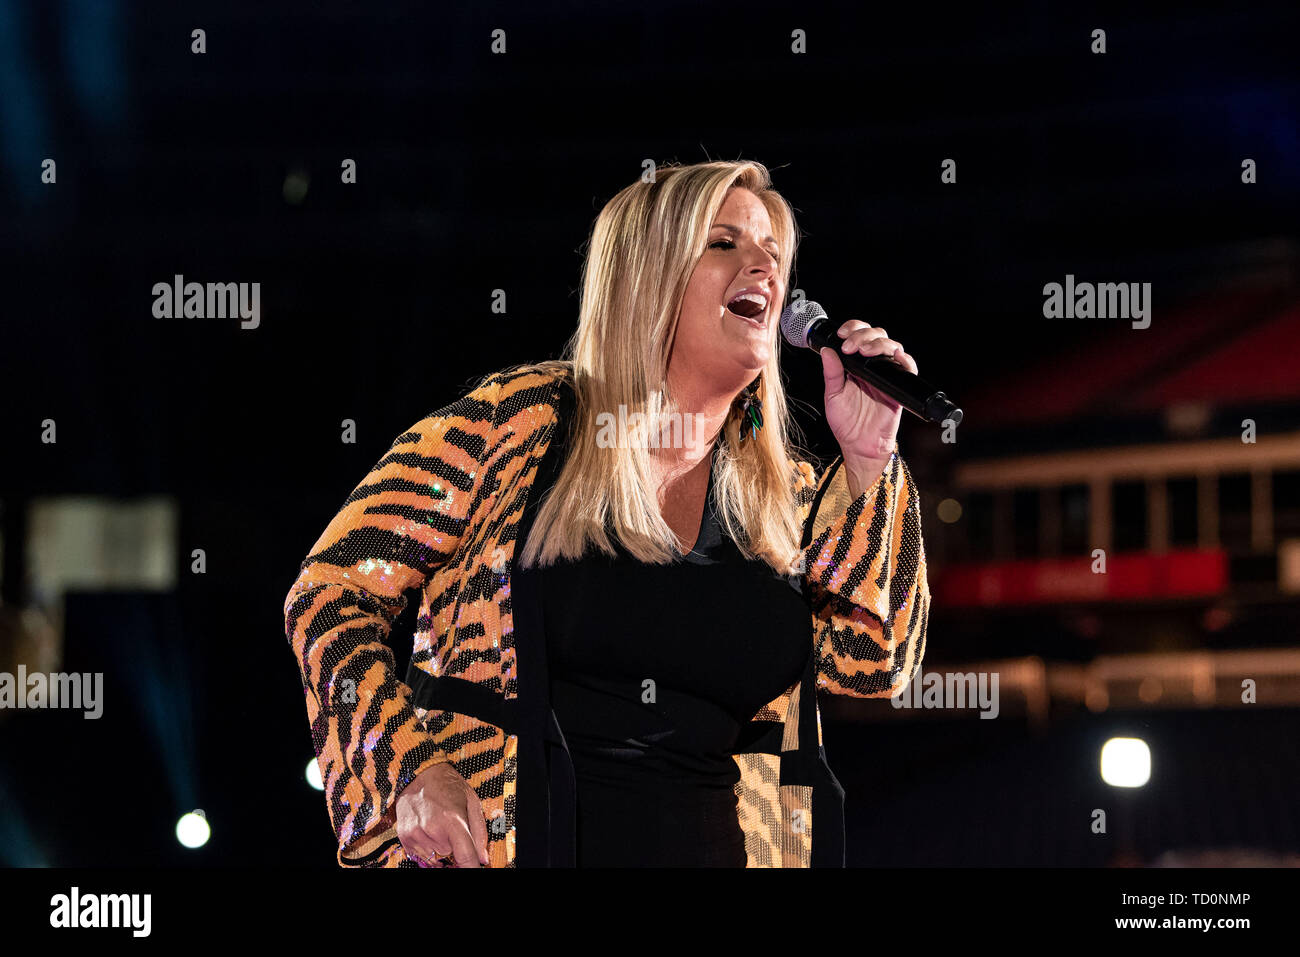 NASHVILLE, TENNESSEE - JUNE 09: Trisha Yearwood performs on stage for day 4 of the 2019 CMA Music Festival on June 09, 2019 in Nashville, Tennessee. Photo: Andrew Wendowski for imageSPACE/MediaPunch Stock Photo